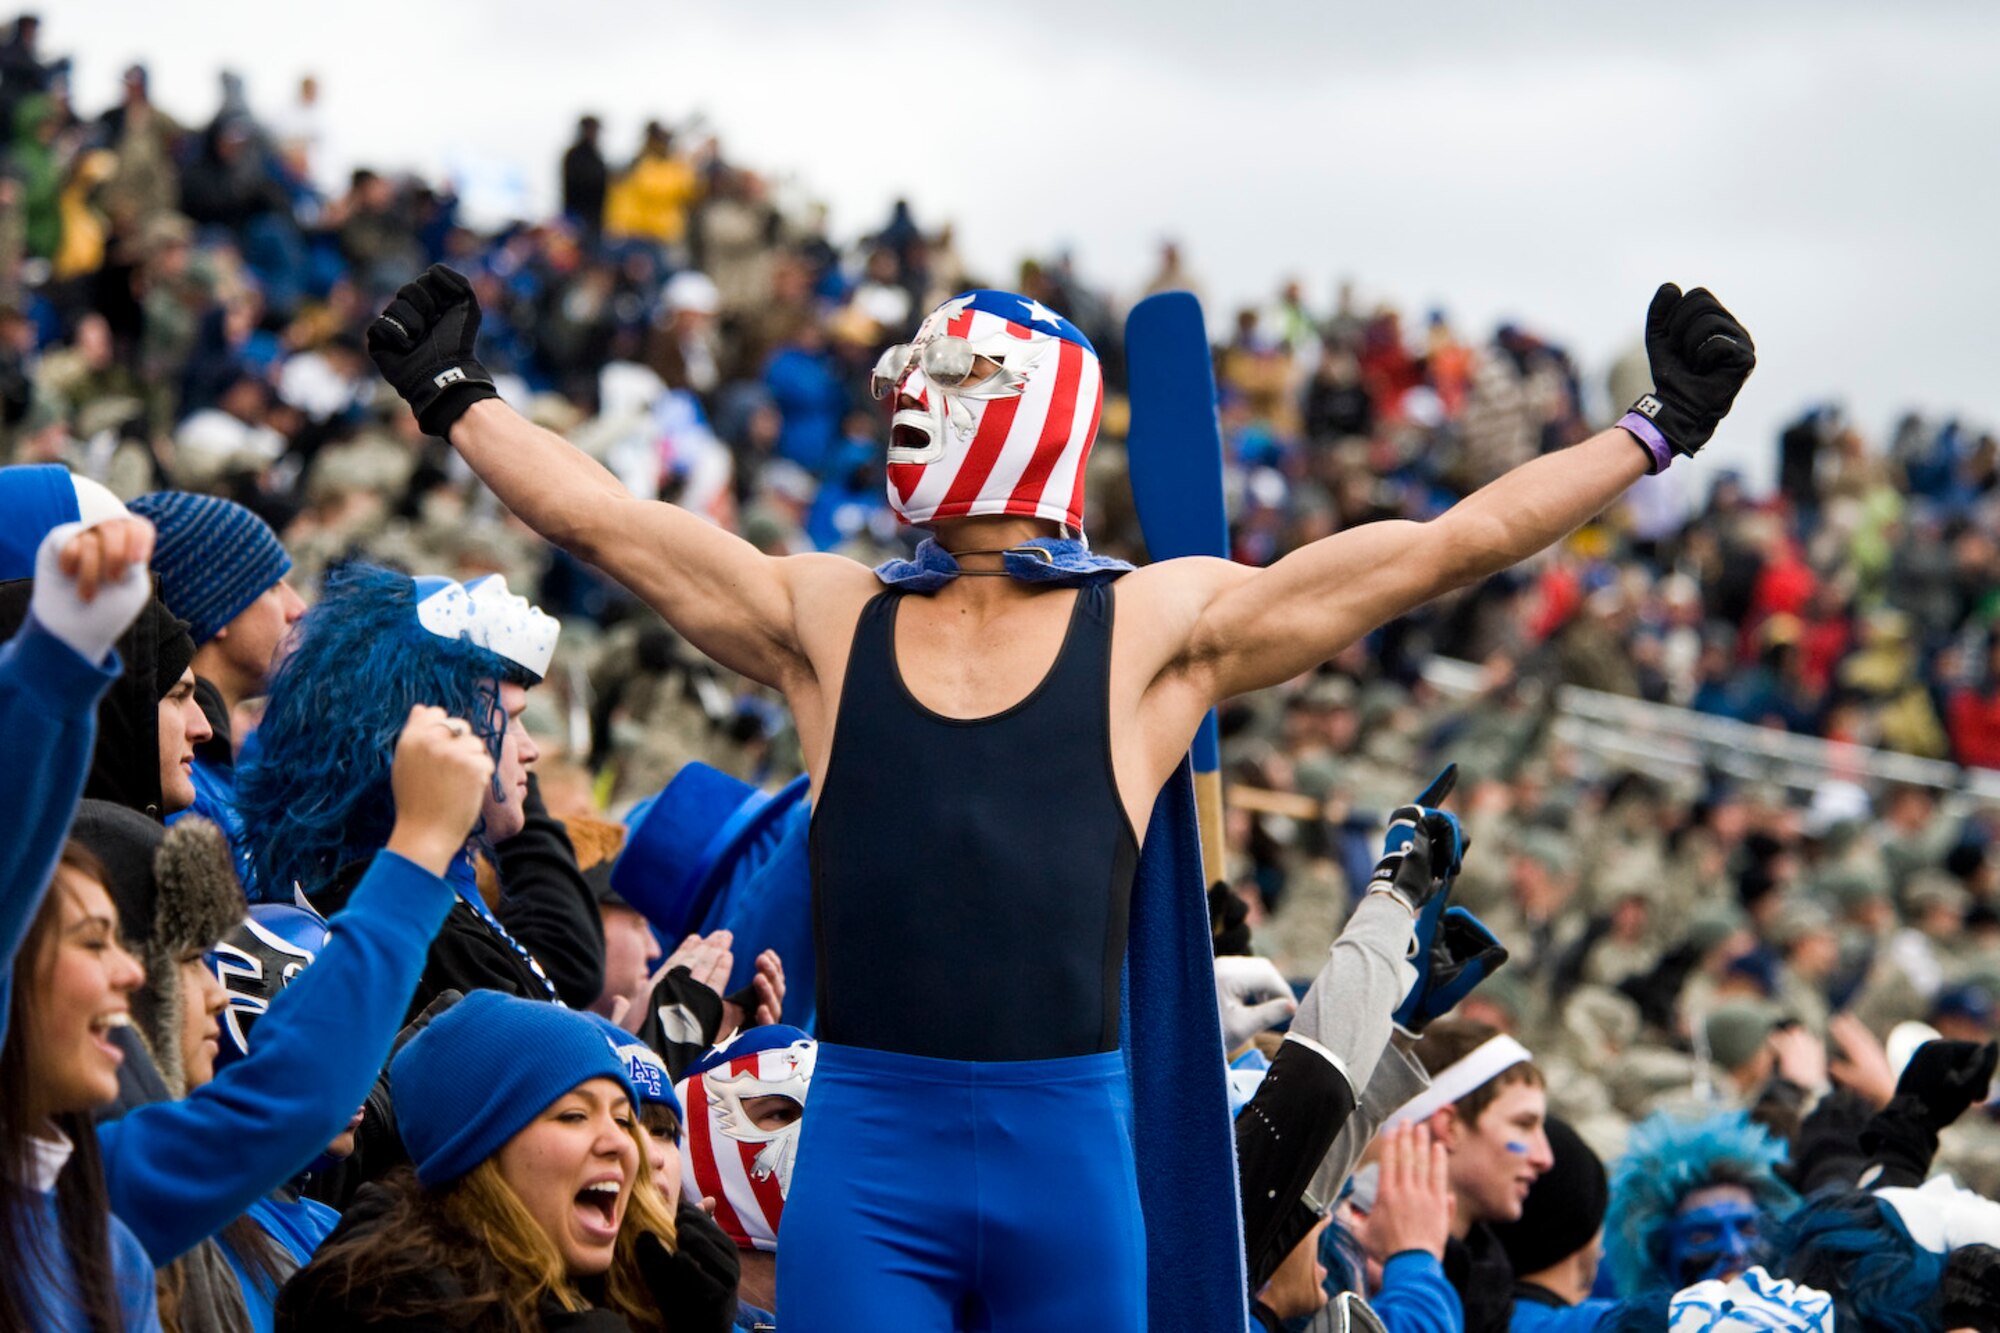 An Air Force Academy cadet celebrates after the Falcons victory over the Knights at the Air Force Academy, Colo., Nov. 5, 2011. With the win, the Falcons retained the Commander-in-Chiefs trophy for the second consecutive year. (U.S. Air Force photo by Airman Alystria Maurer/Released)